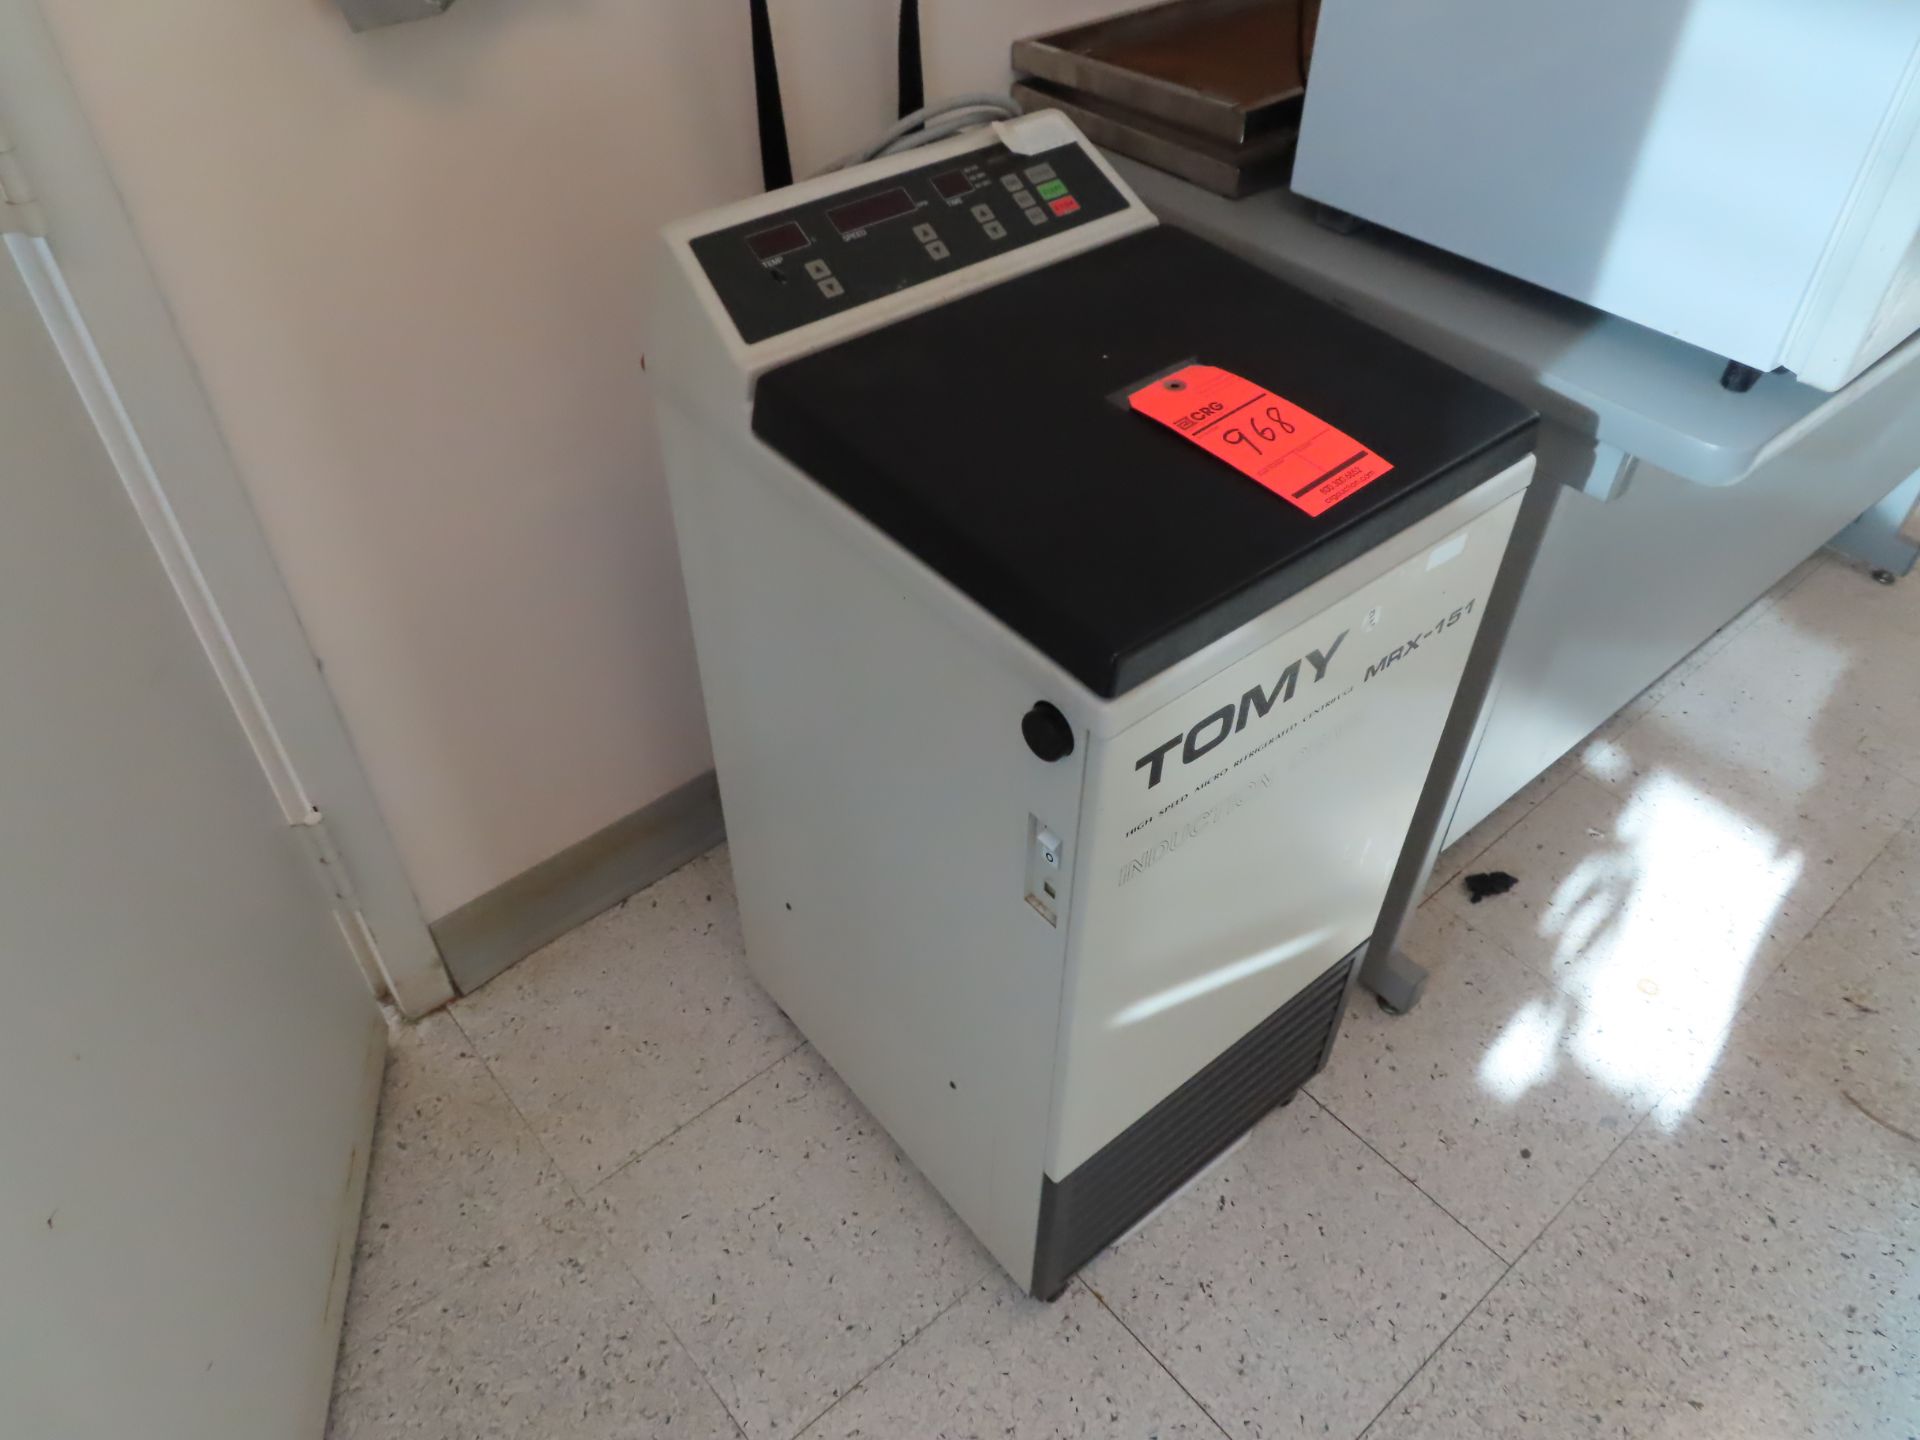 Tomy MRX-151 high speed micro refrigerated centrifuge, s/n 601026, located in D wing, 3rd floor,